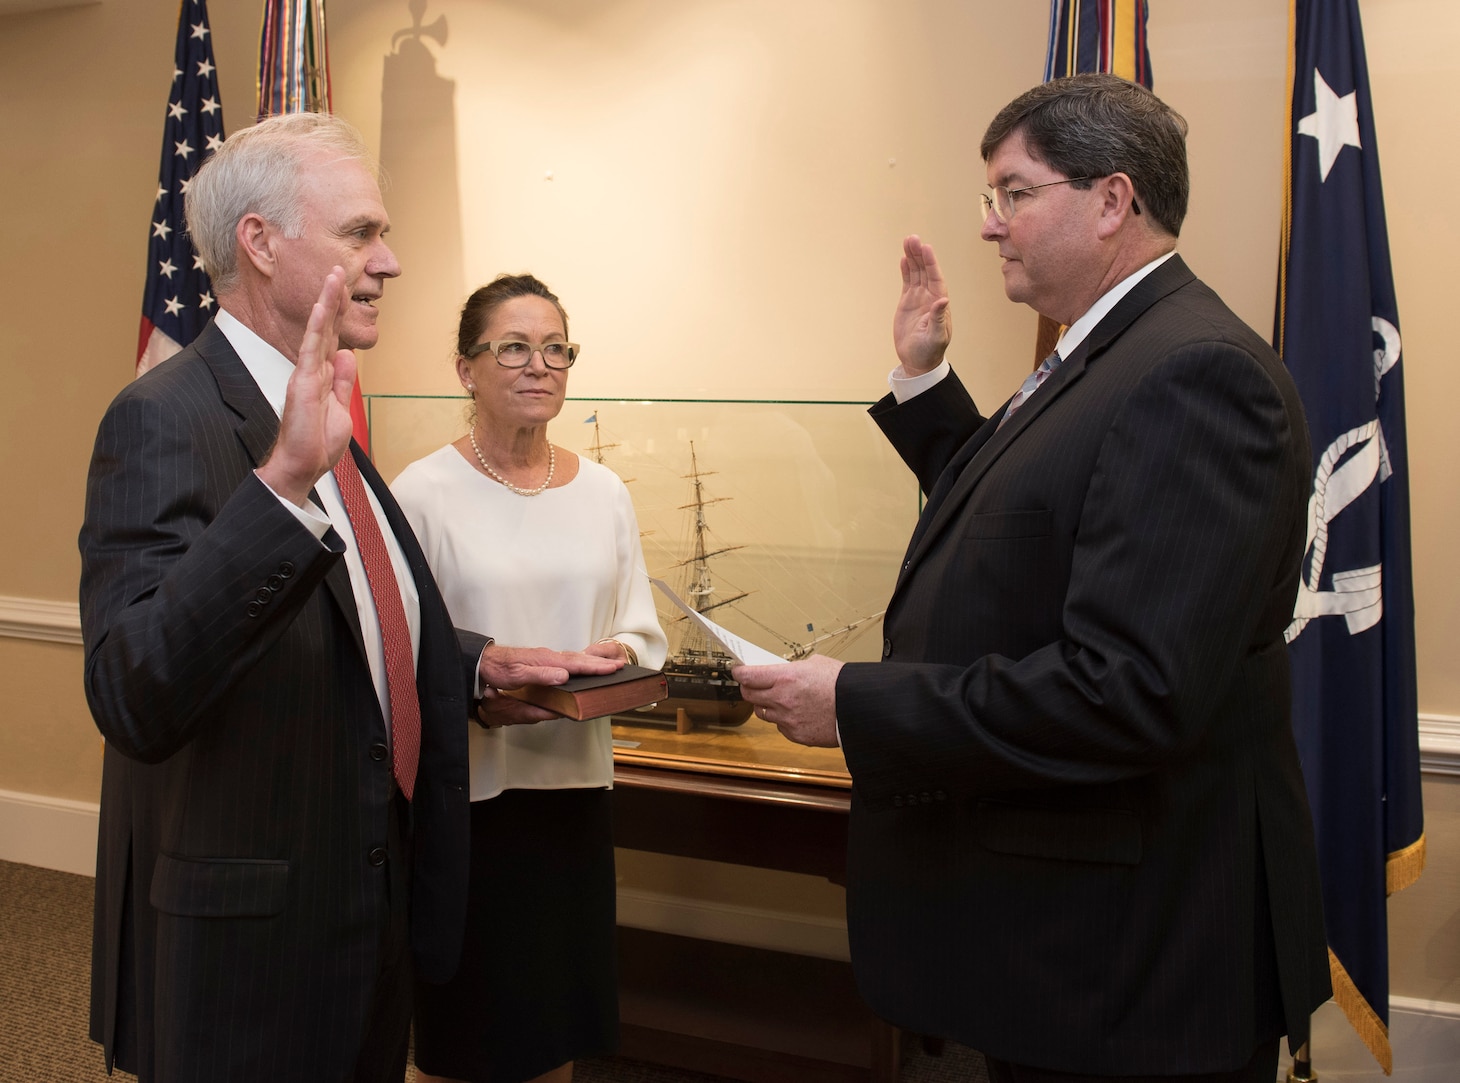 Spencer is Sworn in as the 76th Secretary of the Navy